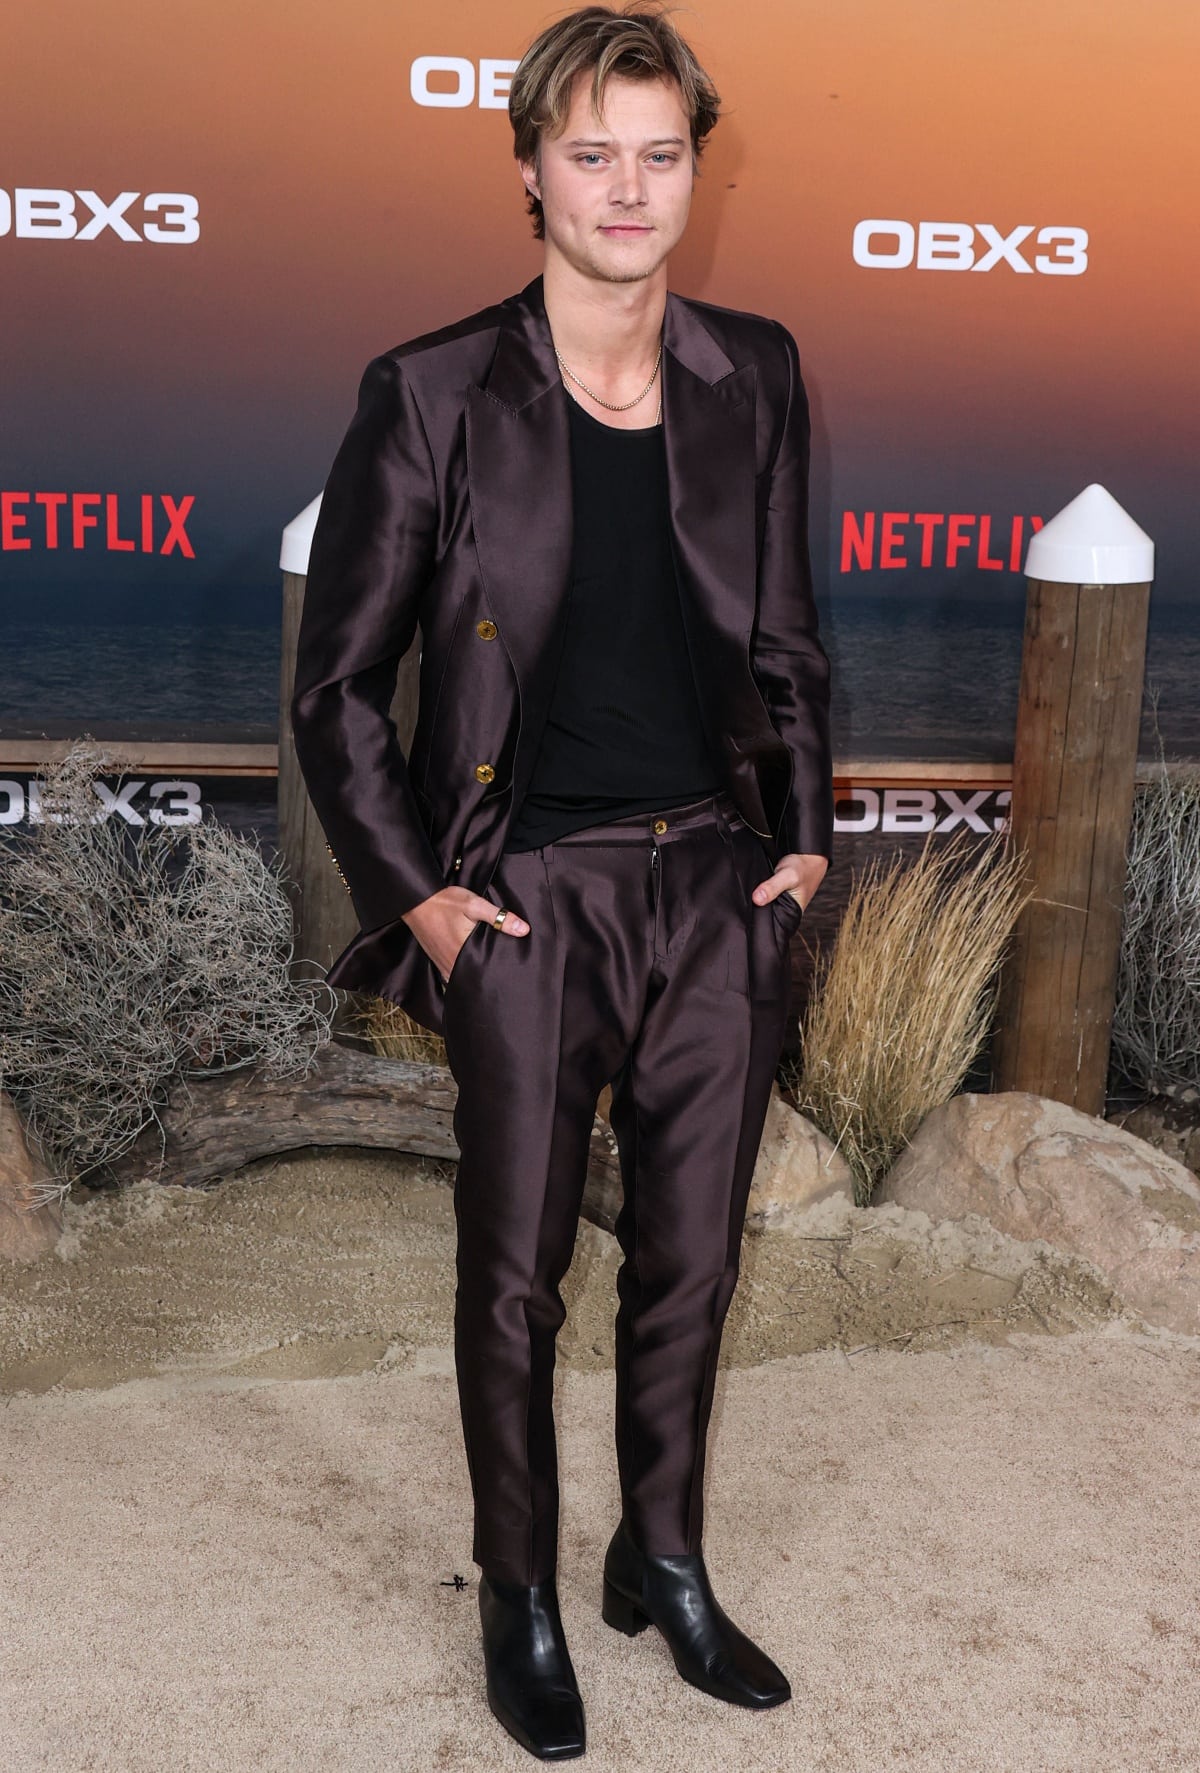 Rudy Pankow in a Dolce & Gabbana silk suit and square-toed boots at the premiere of Netflix’s Outer Banks Season 3